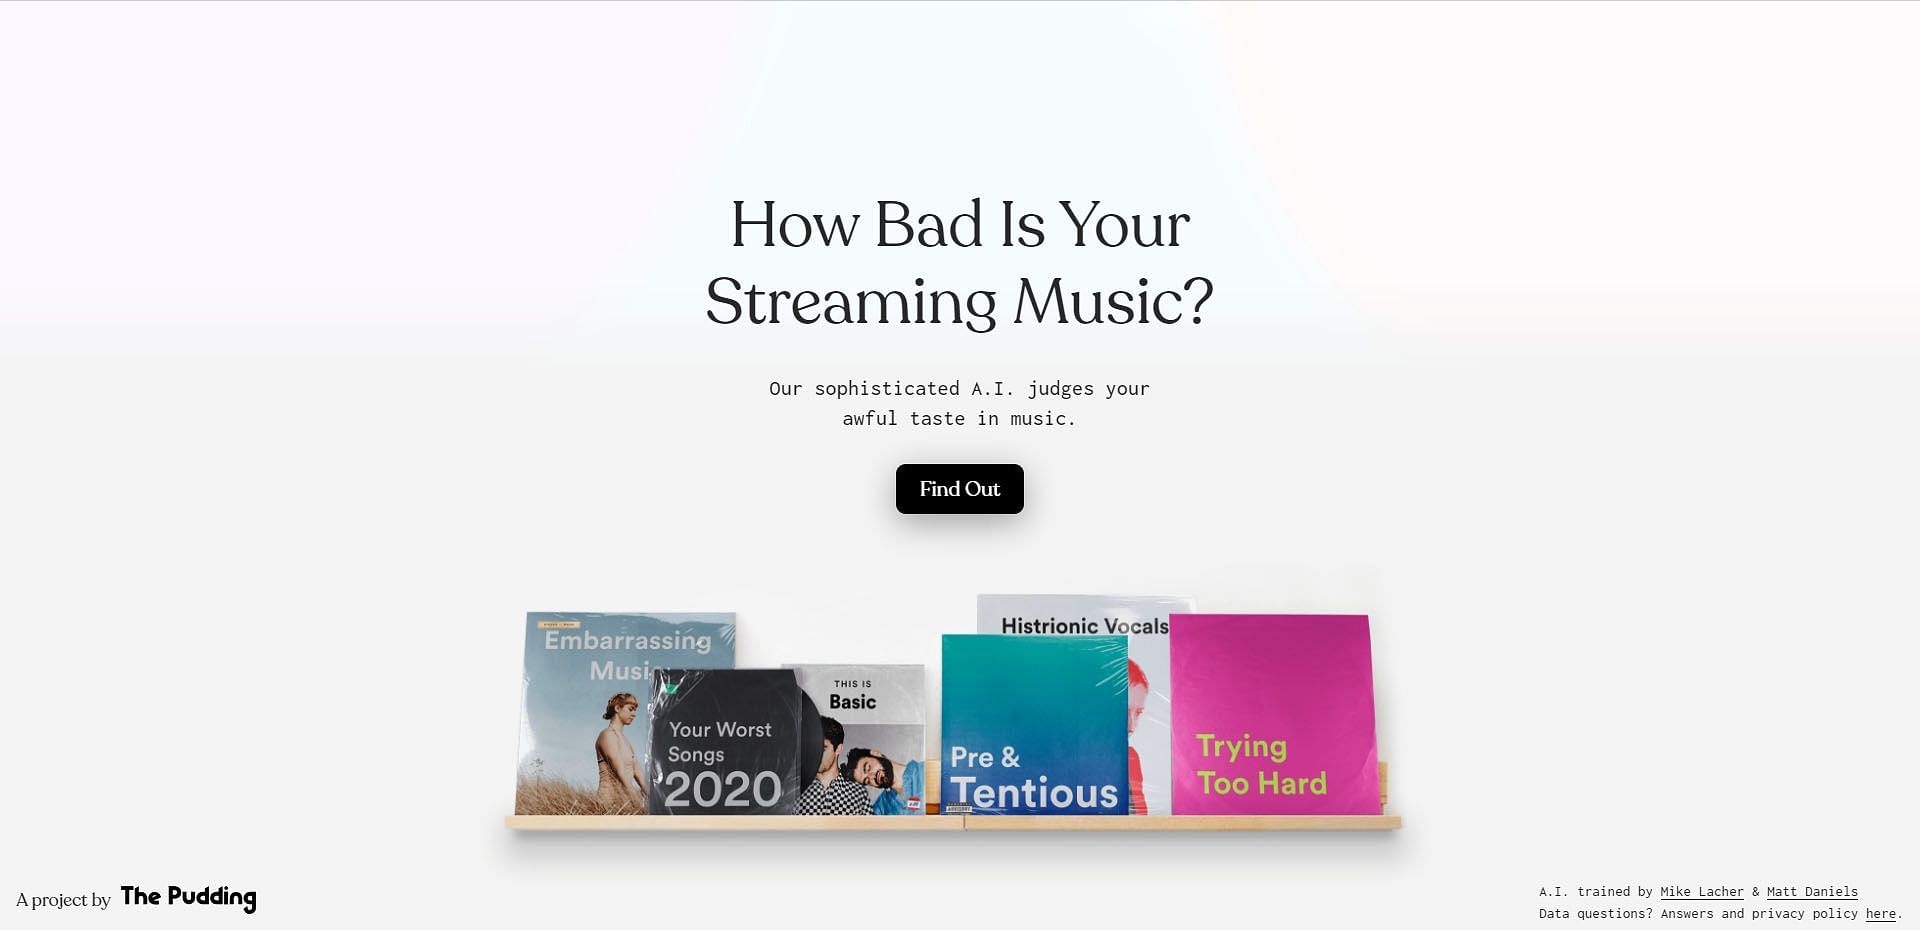 How Bad is Your Streaming Music (image via Pudding)